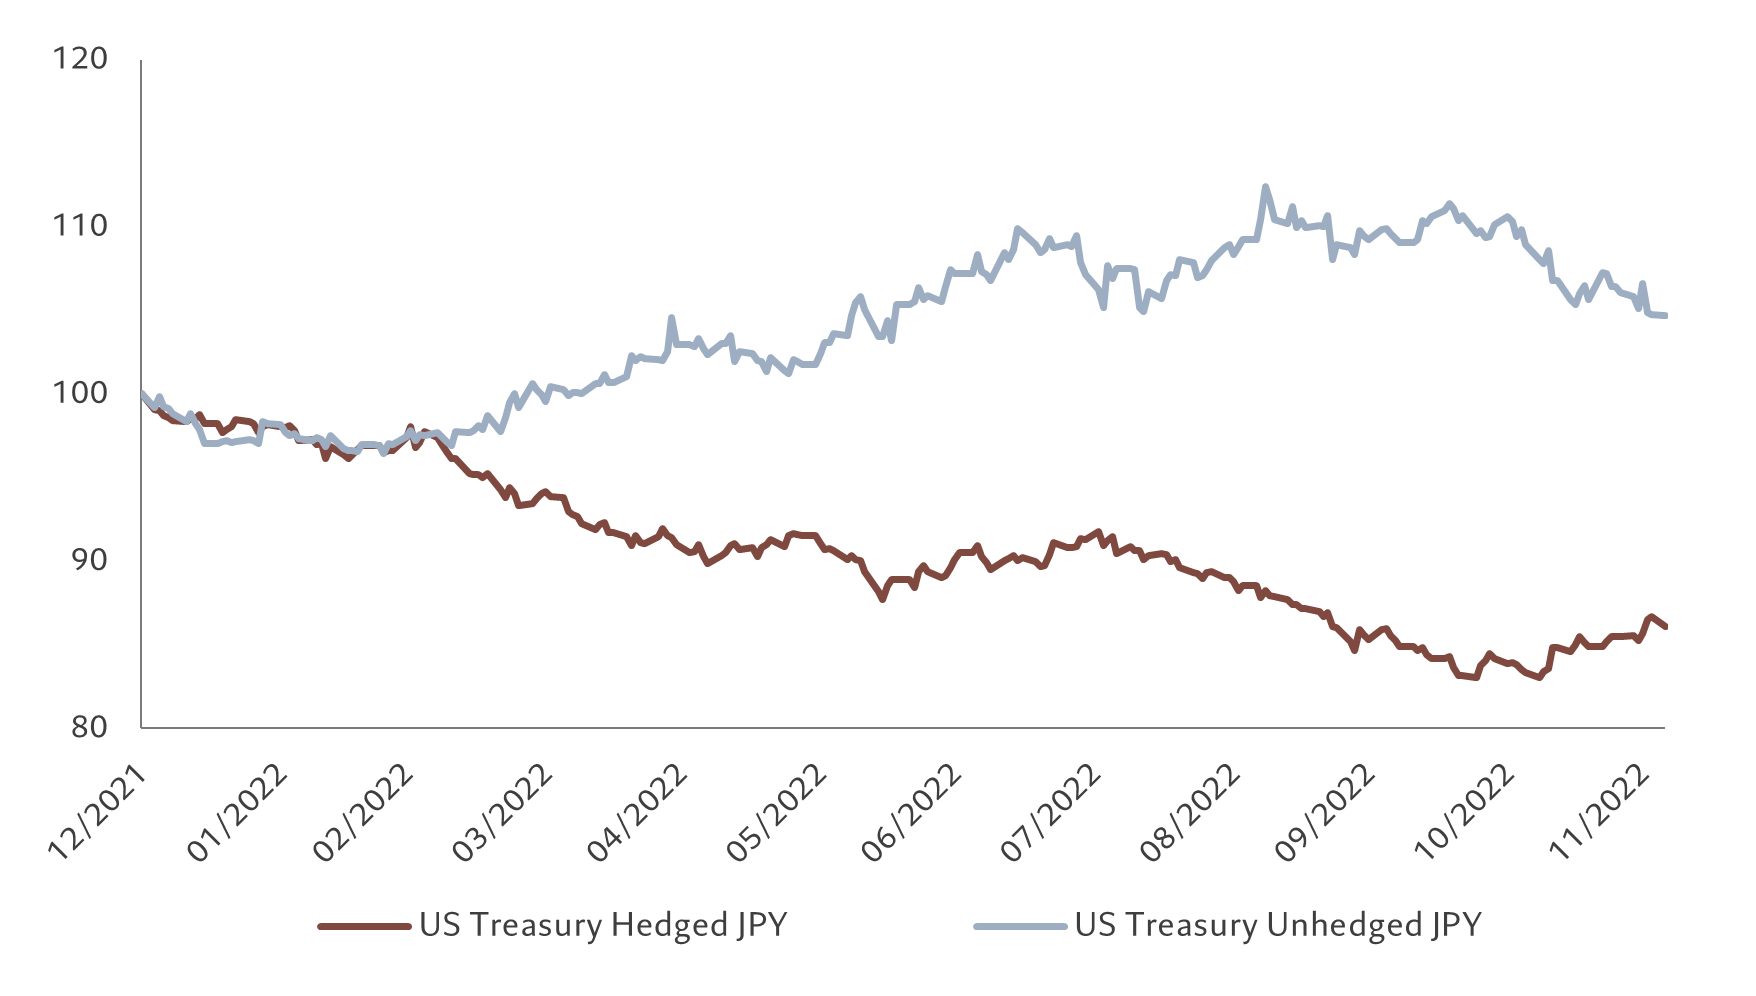 JPY hedged unhedged